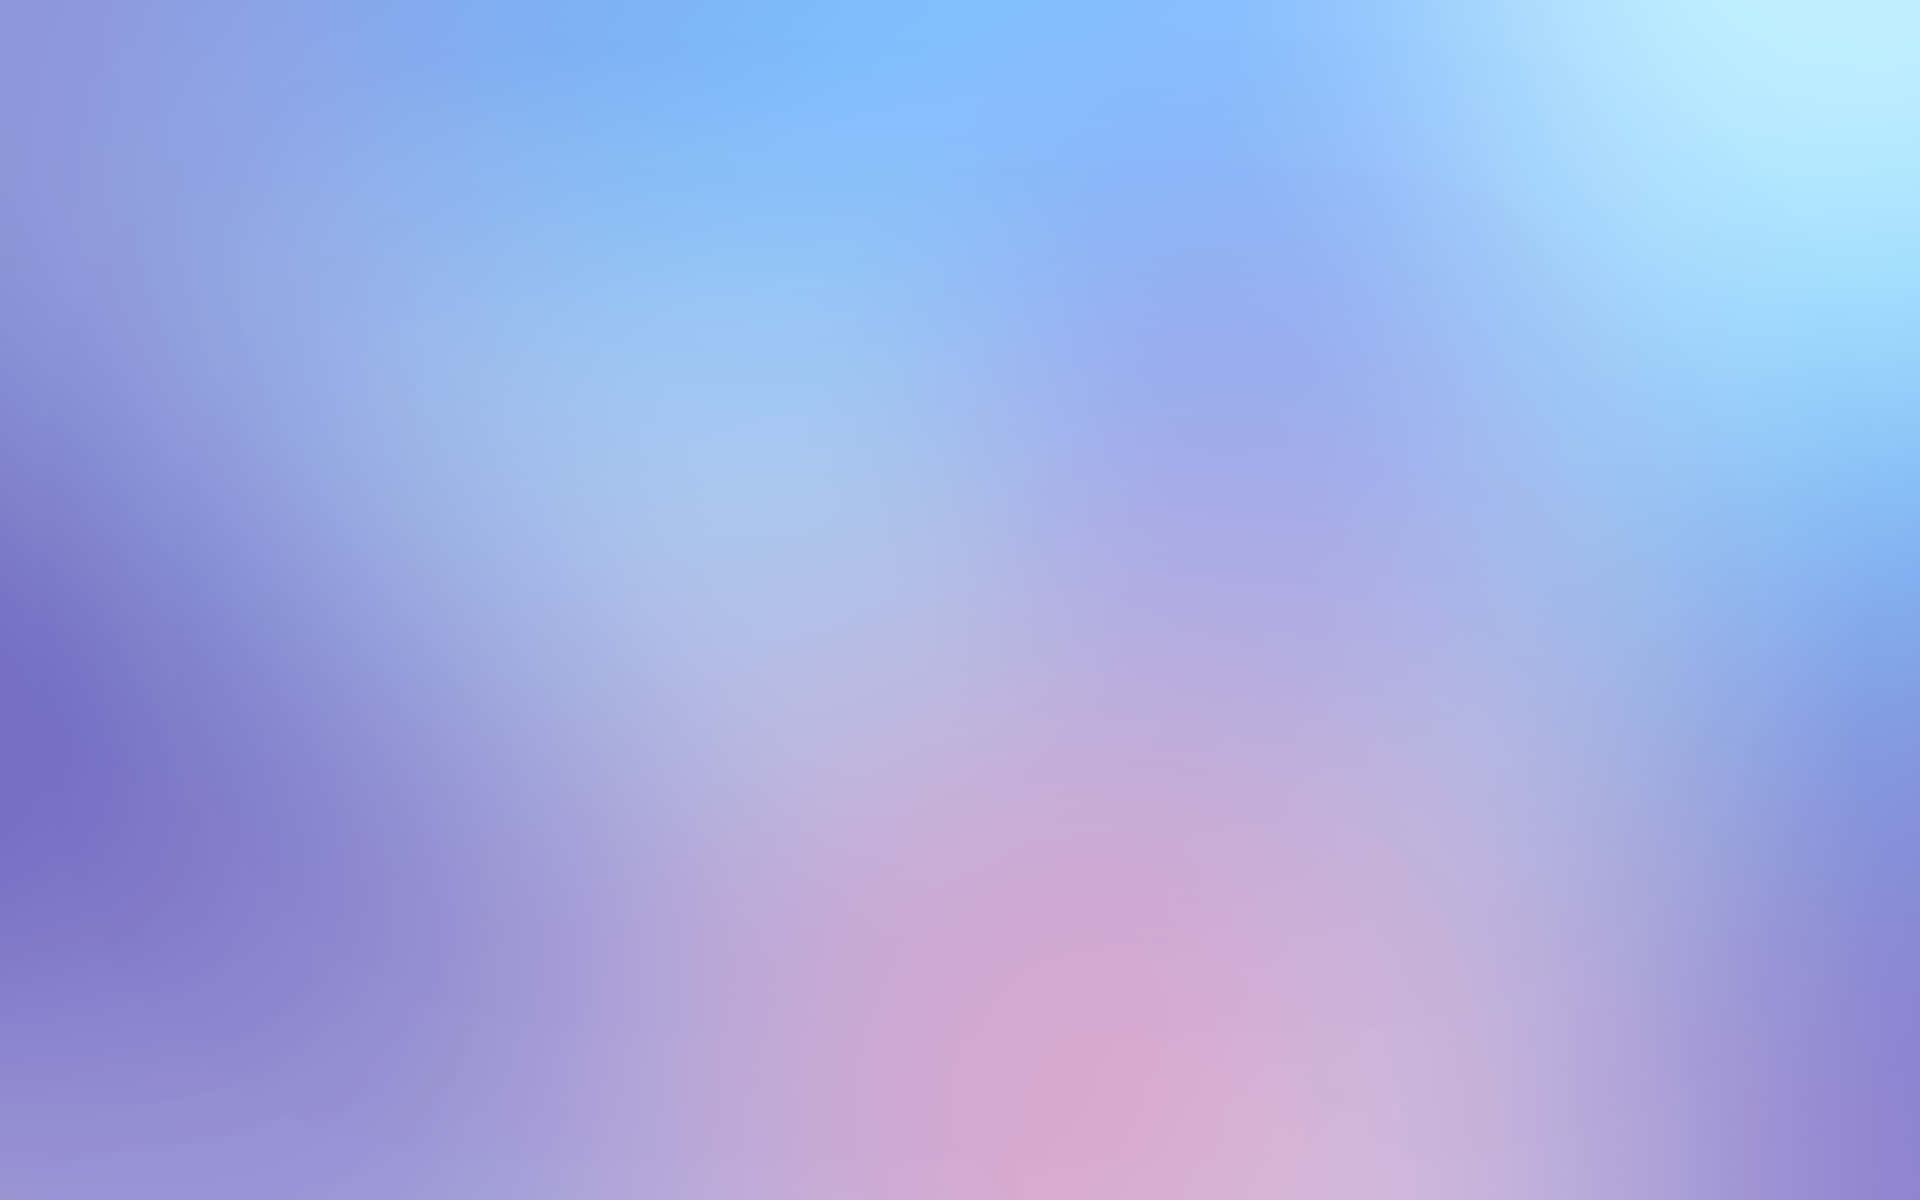 Pink With Blue Gradient Background